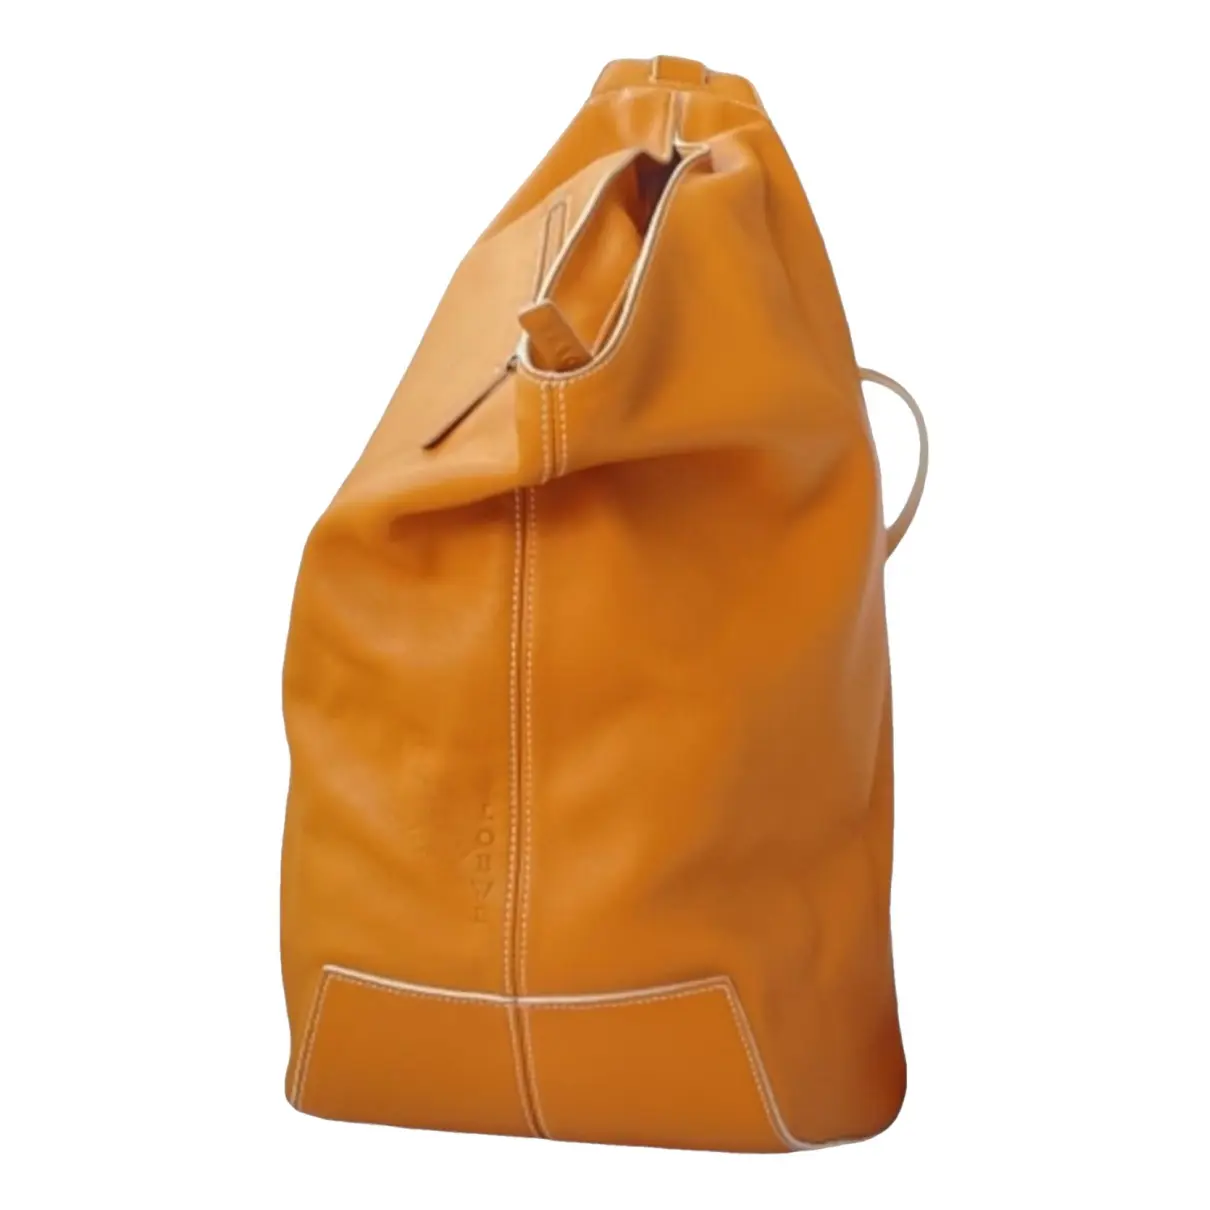 Anton leather backpack